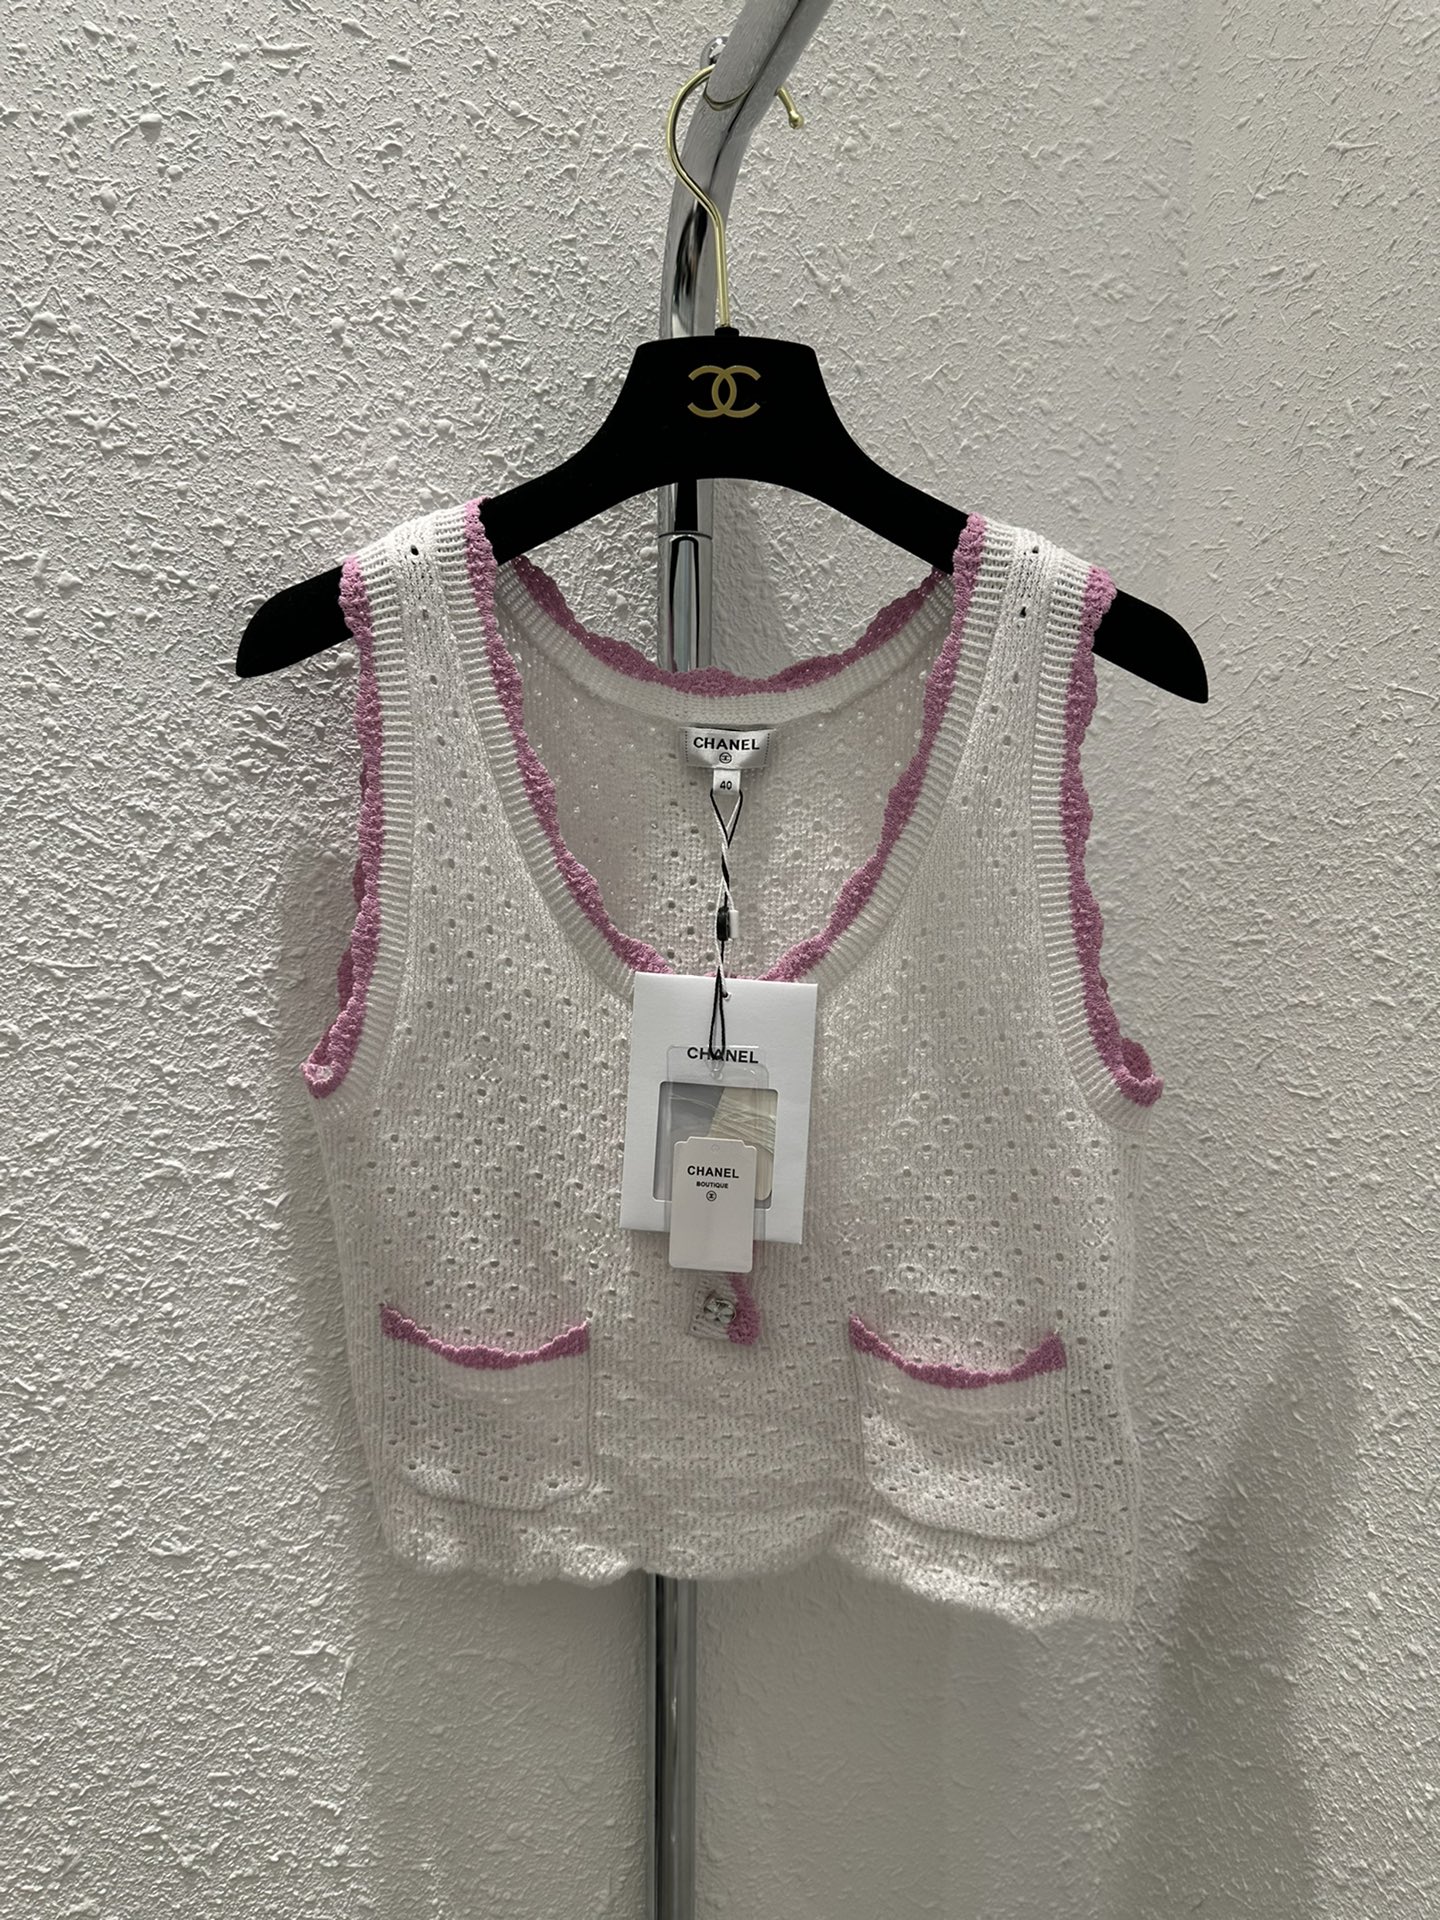 Chanel Clothing Tank Tops&Camis Best Wholesale Replica
 Openwork Knitting Spring/Summer Collection Vintage